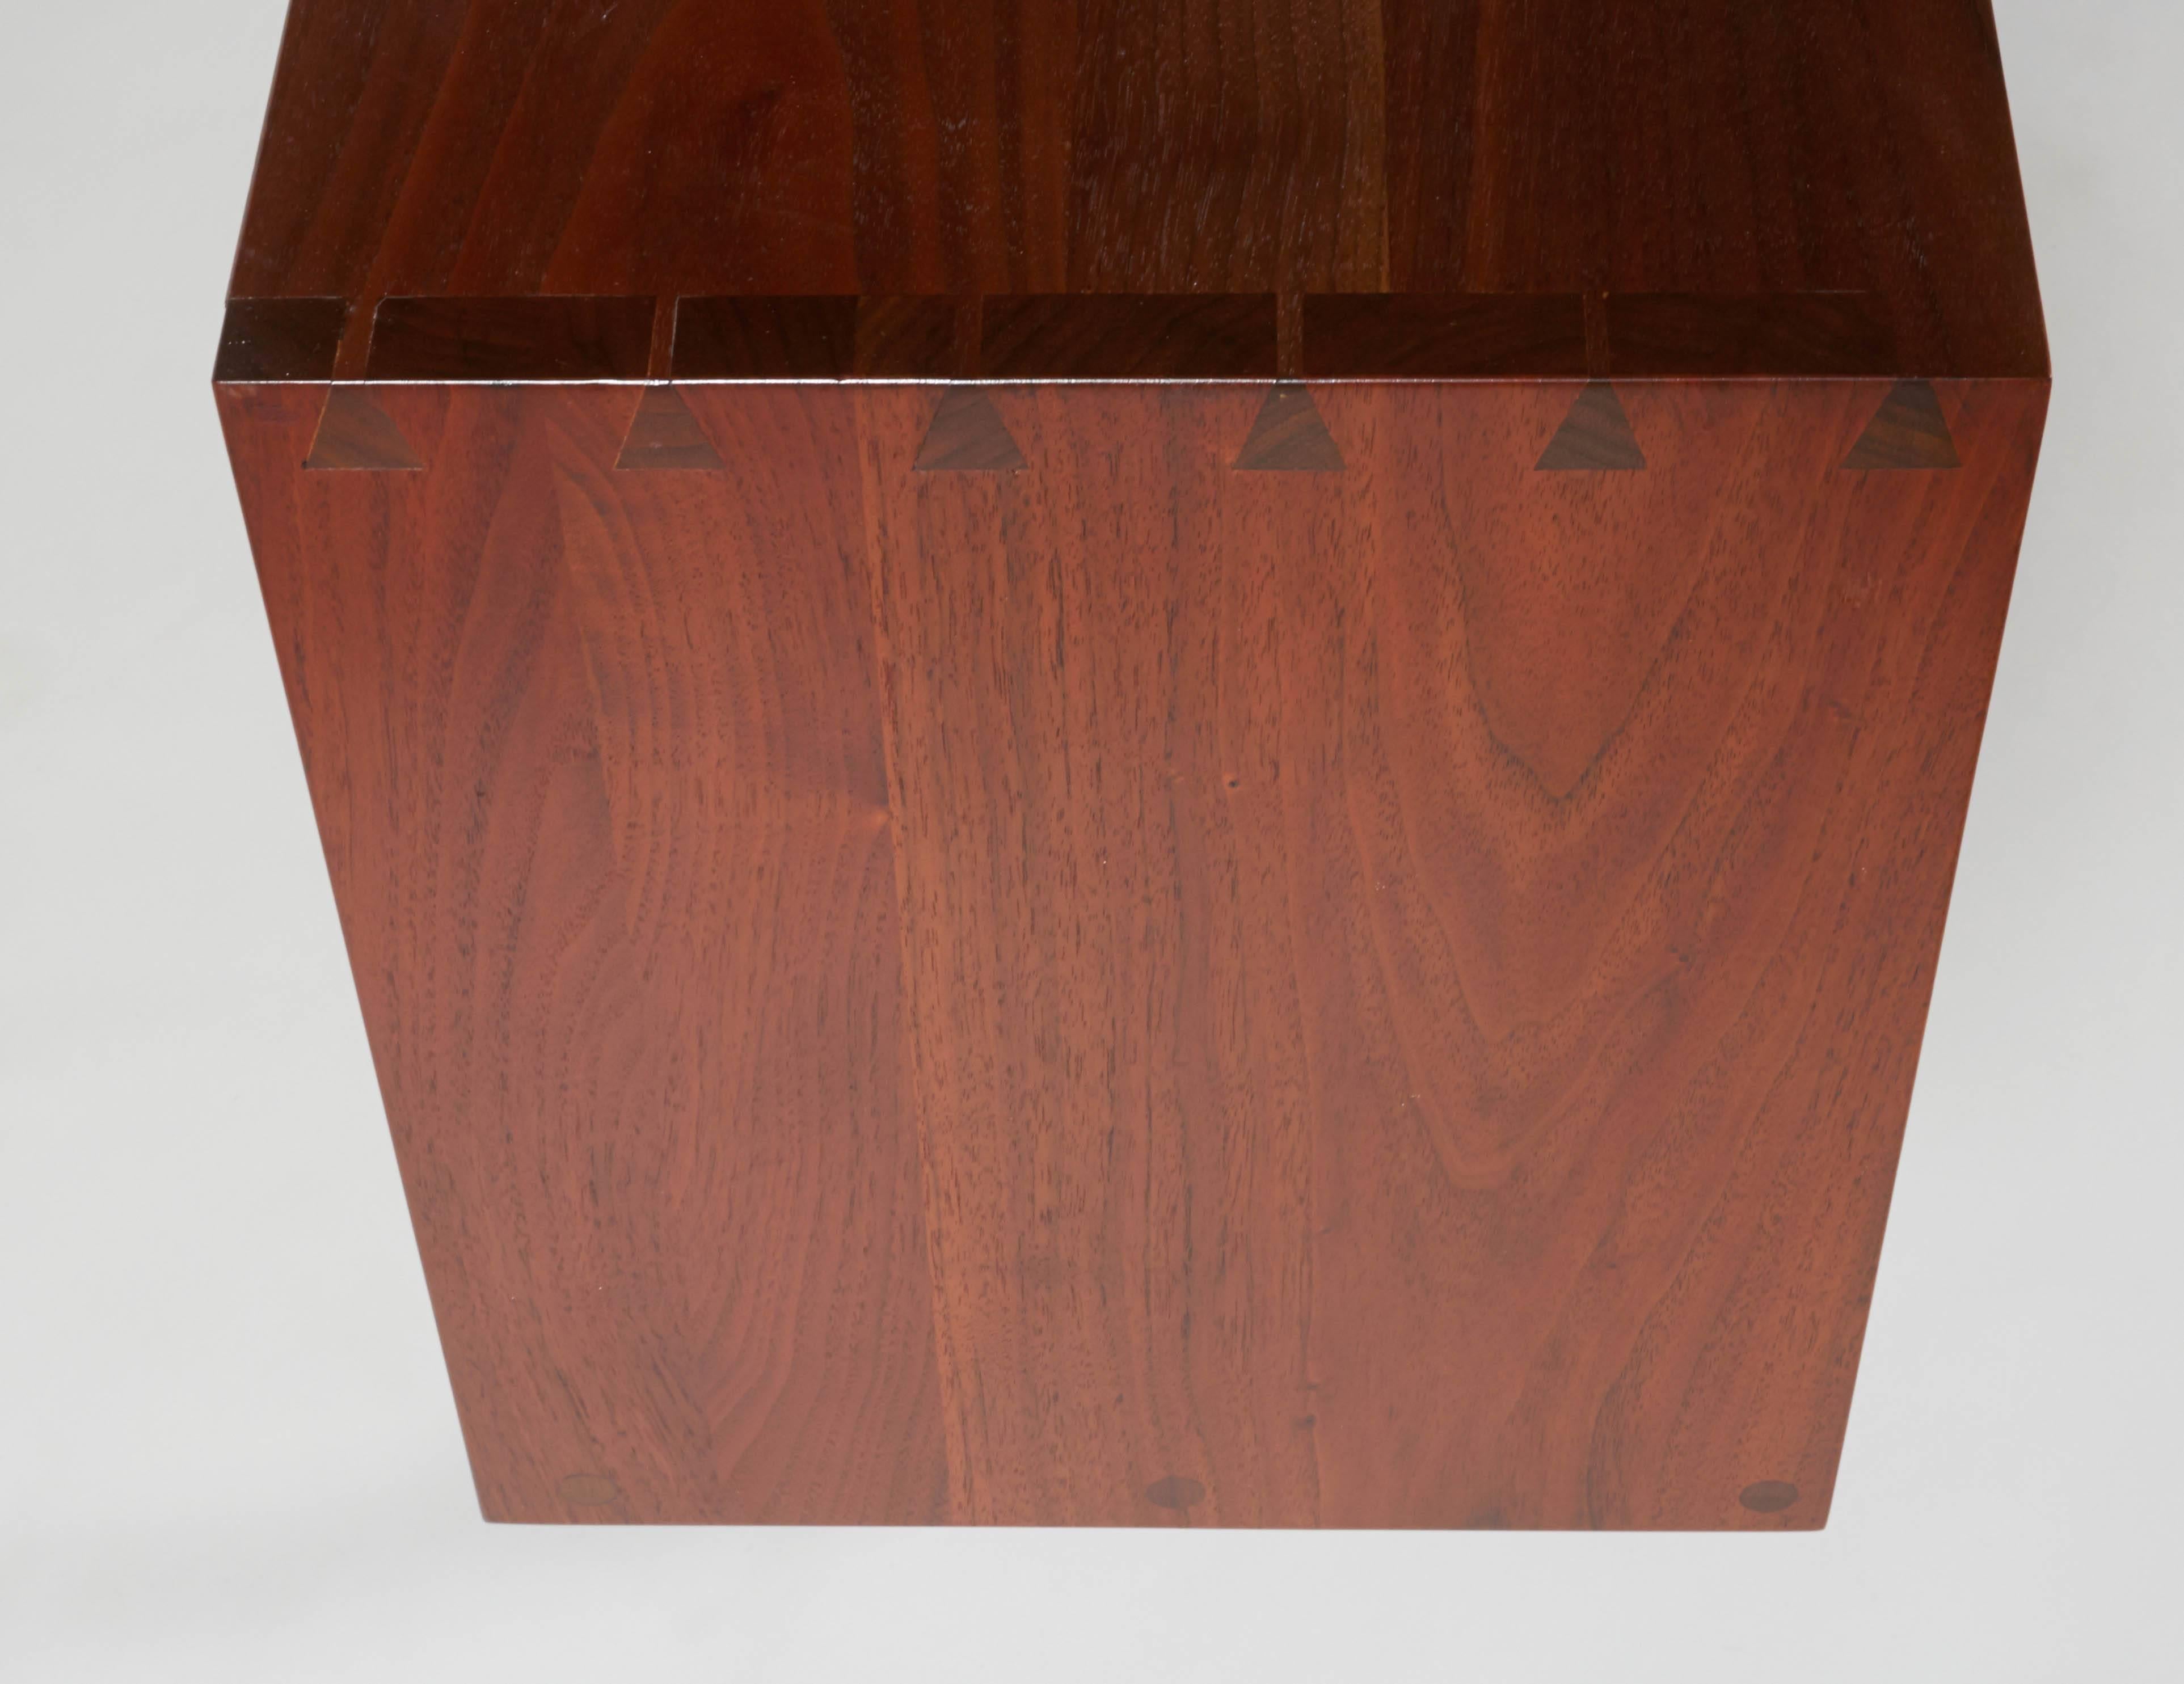 Rare and Exceptional George Nakashima Cabinet 2